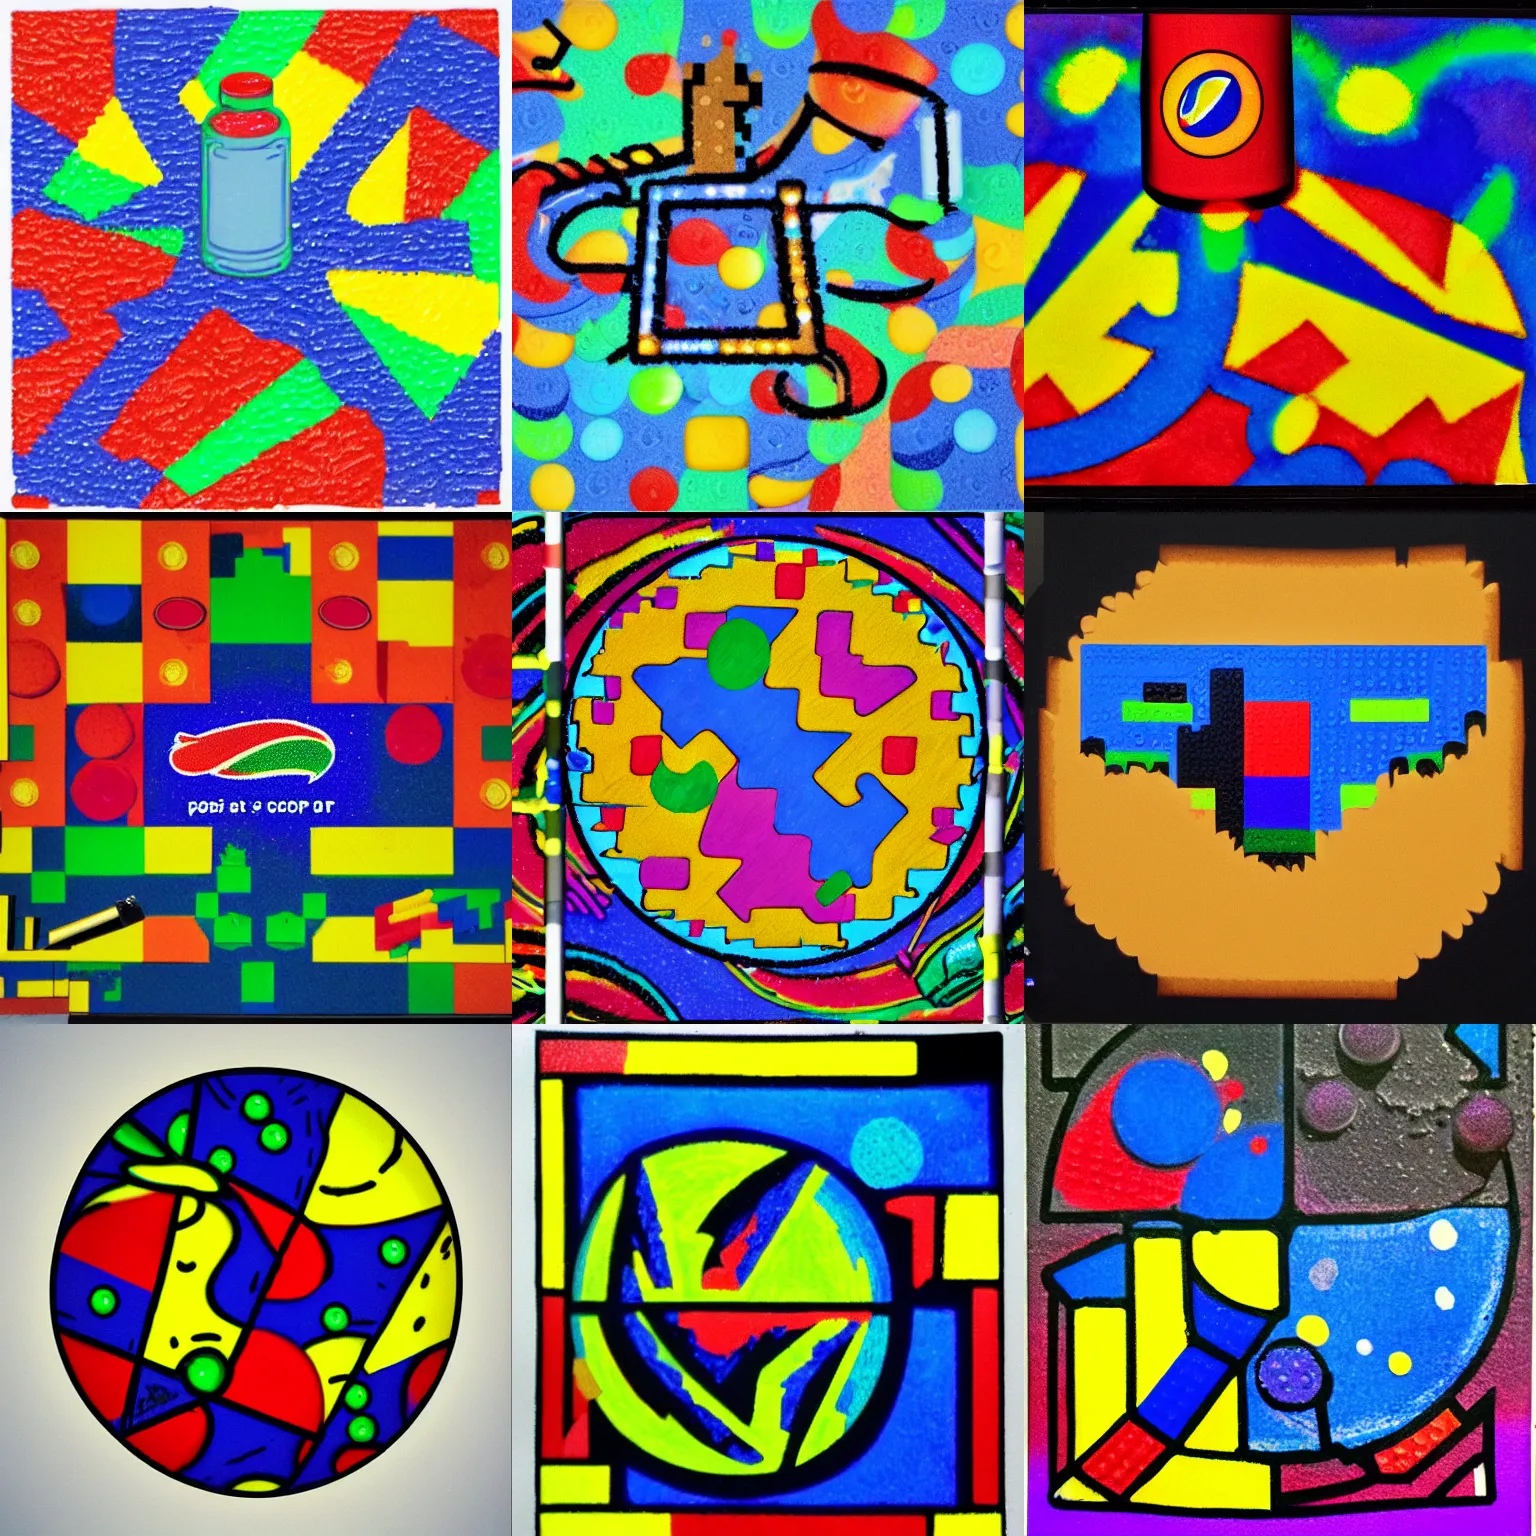 Prompt: Cosmic horror PS2 game lego pancake art pepsi logo 8 bit oil pastels poorly drawn as an abstract collage as an LED light as a mascot for a sugar cereal made of light and shadows cubism Made of bamboo